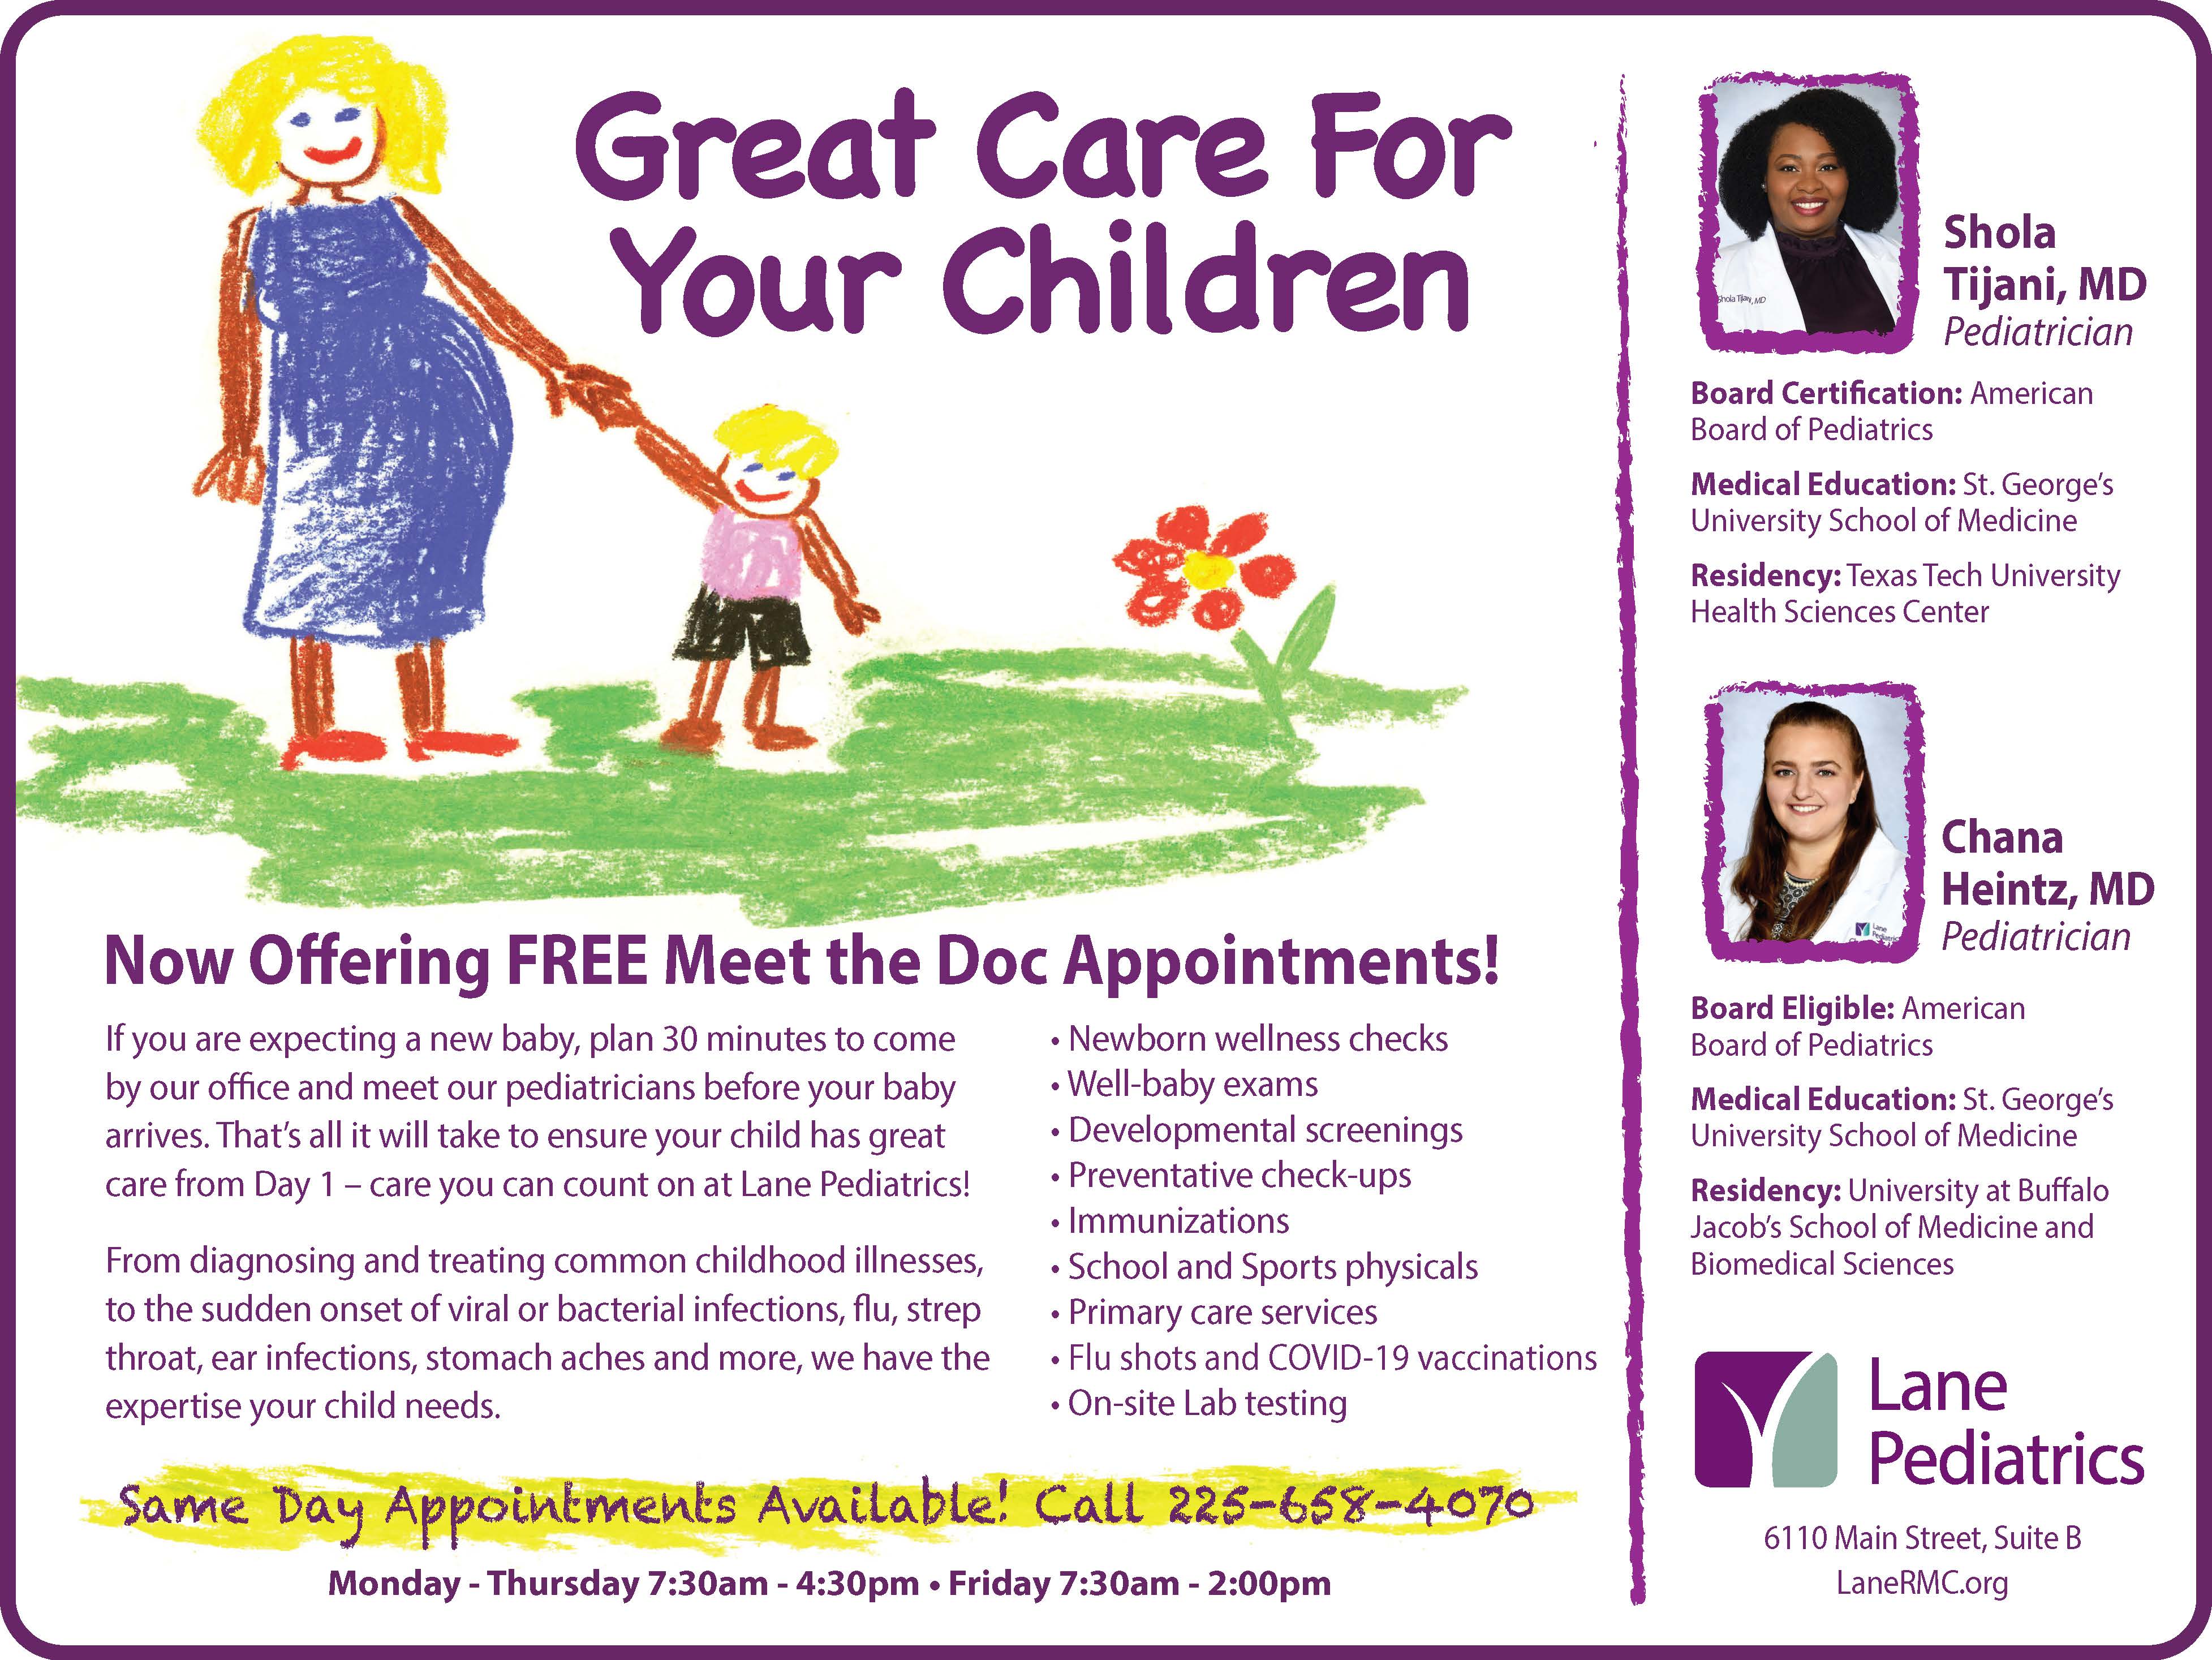 Lane Pediatrics Now Offering FREE Meet the Doc Appointments